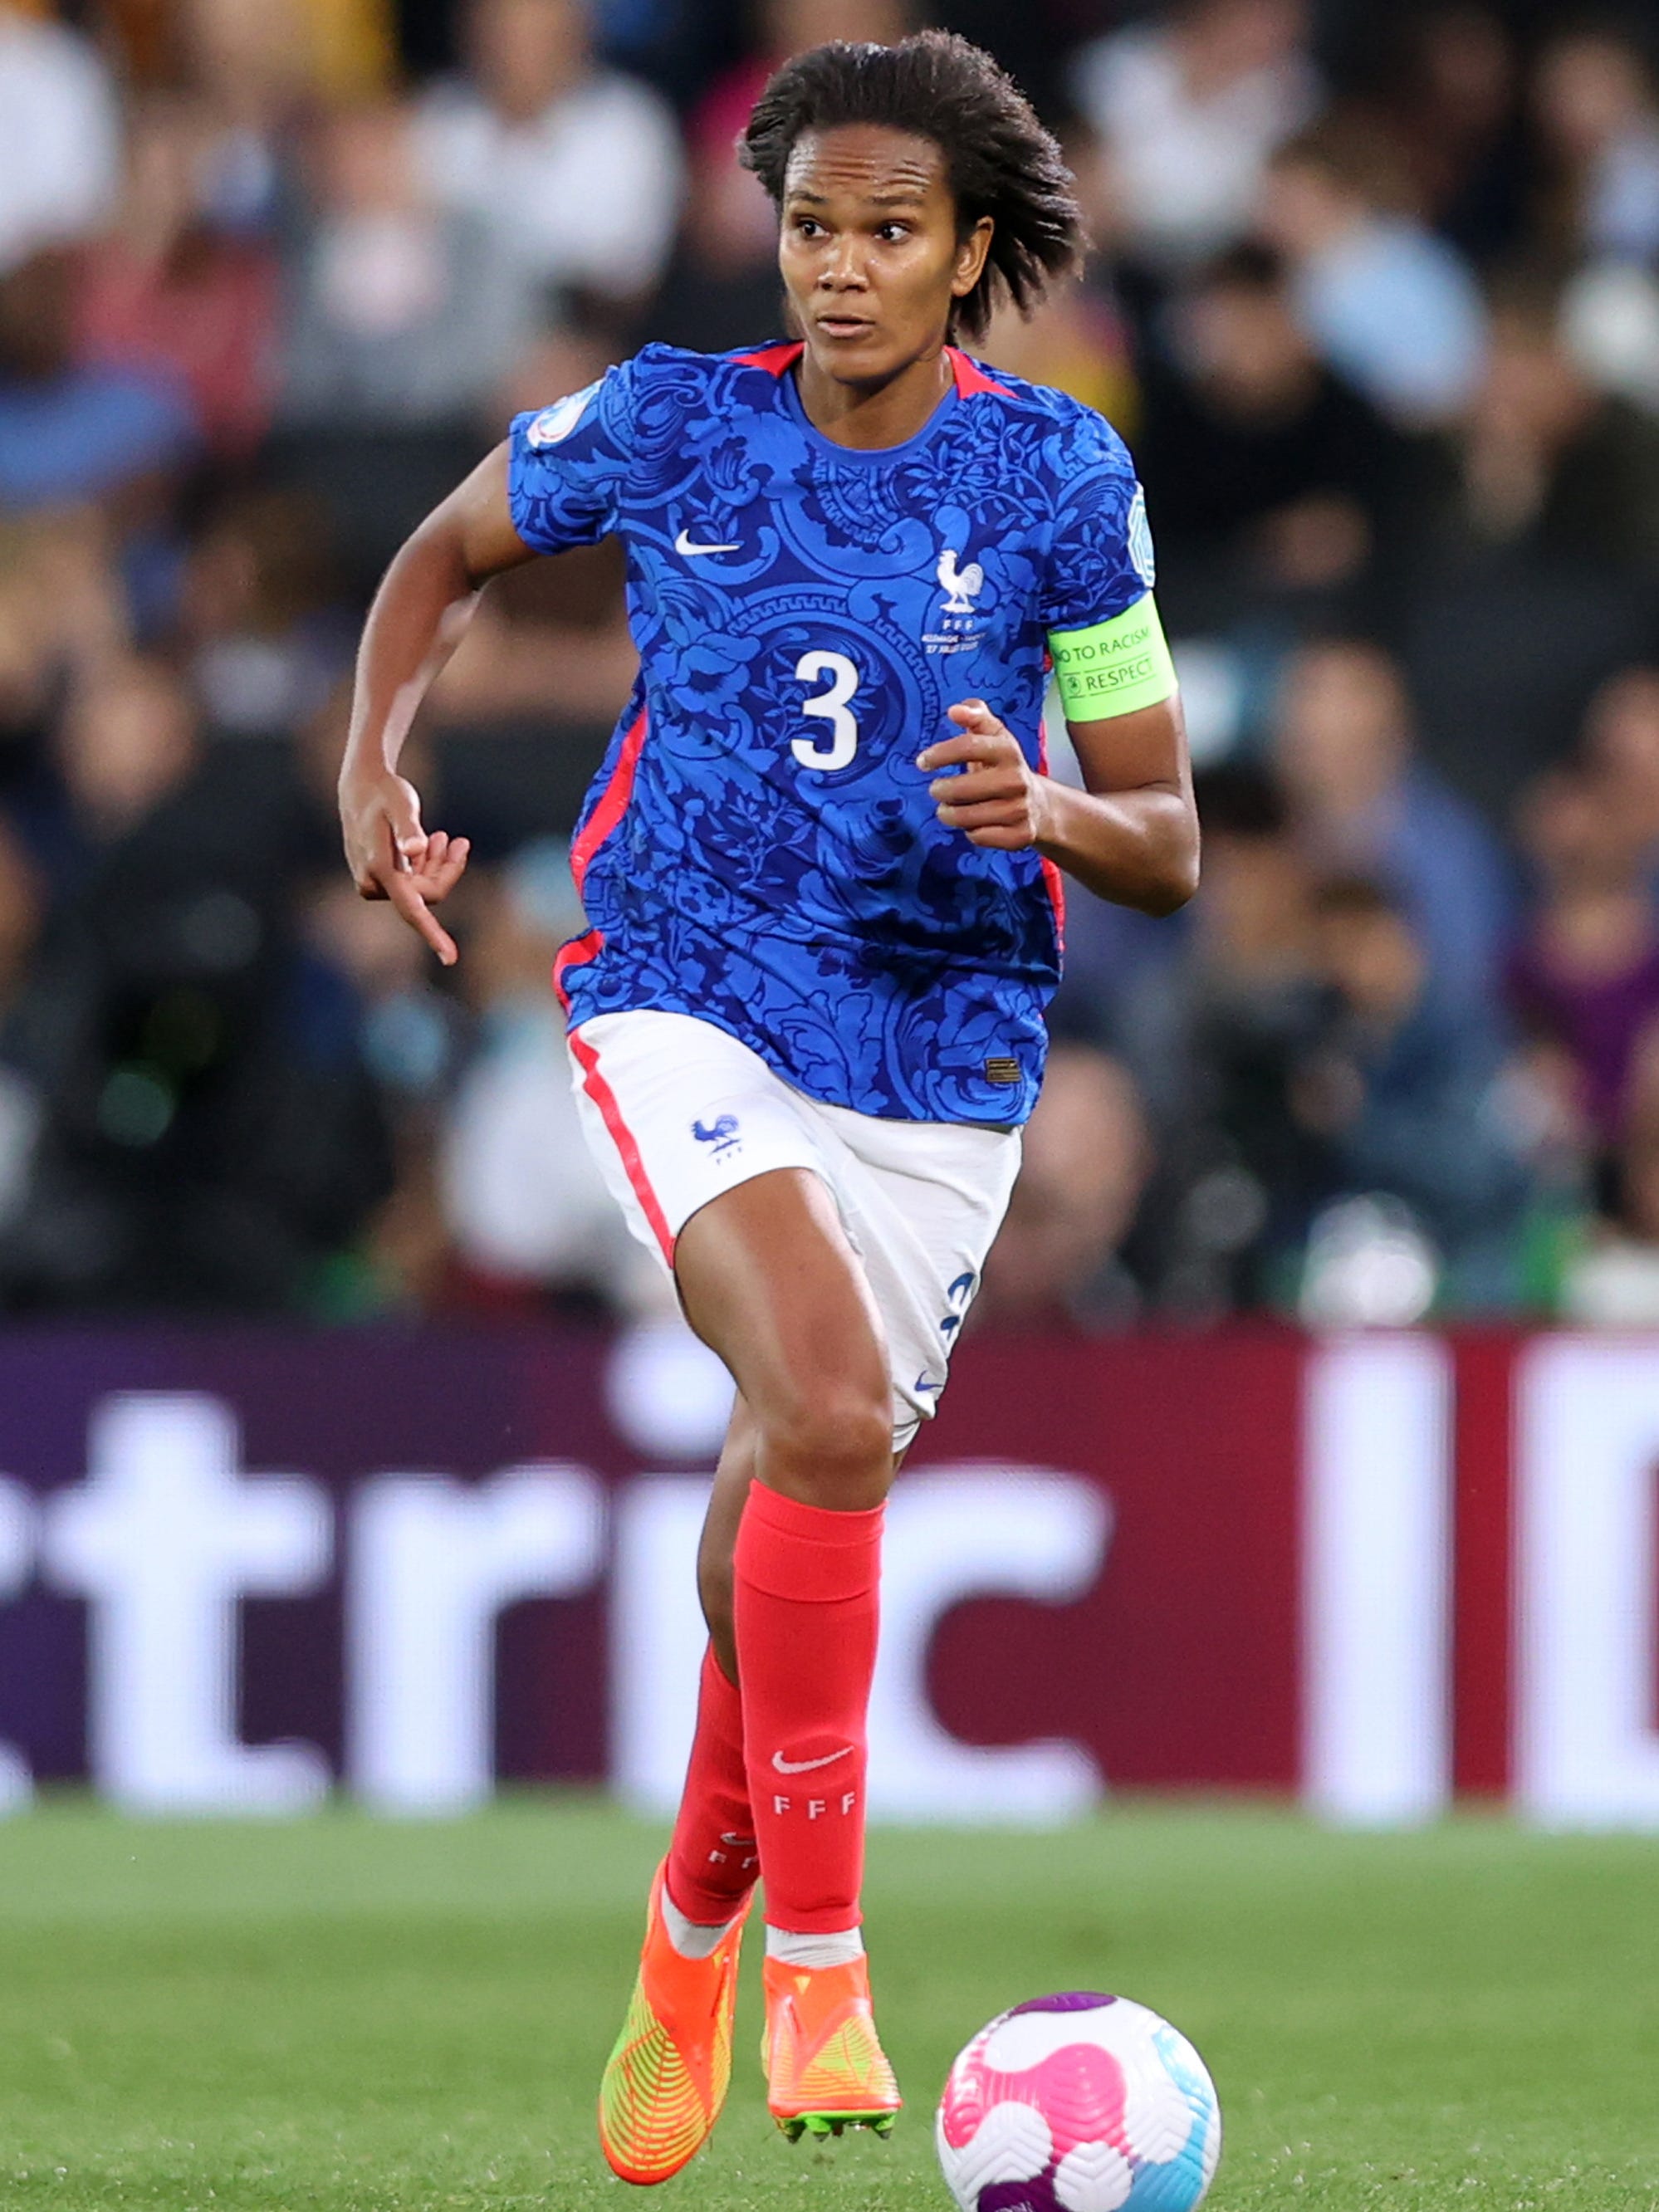 An action image of Wendie Renard playing soccer.